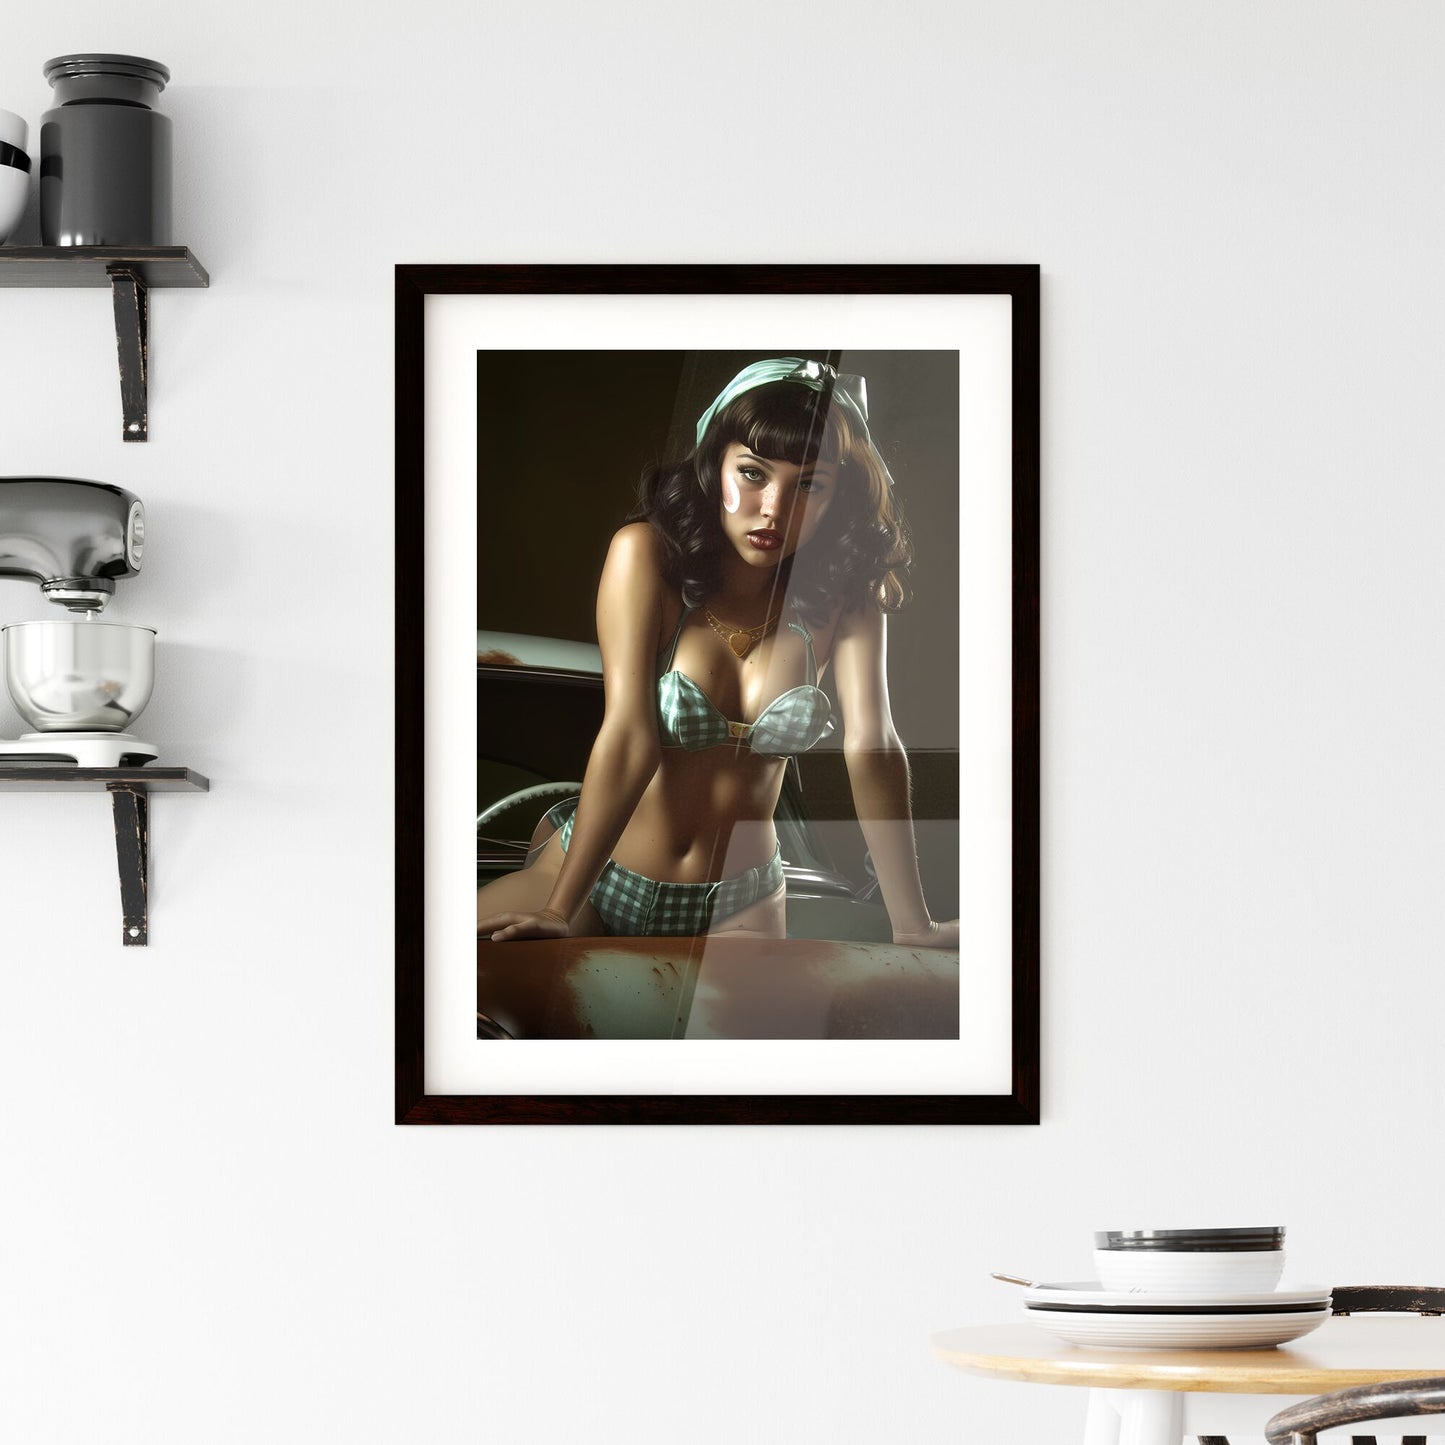 The vintage pin up girl leaning on a car - Art print of a landscape with a road and houses by the water Default Title